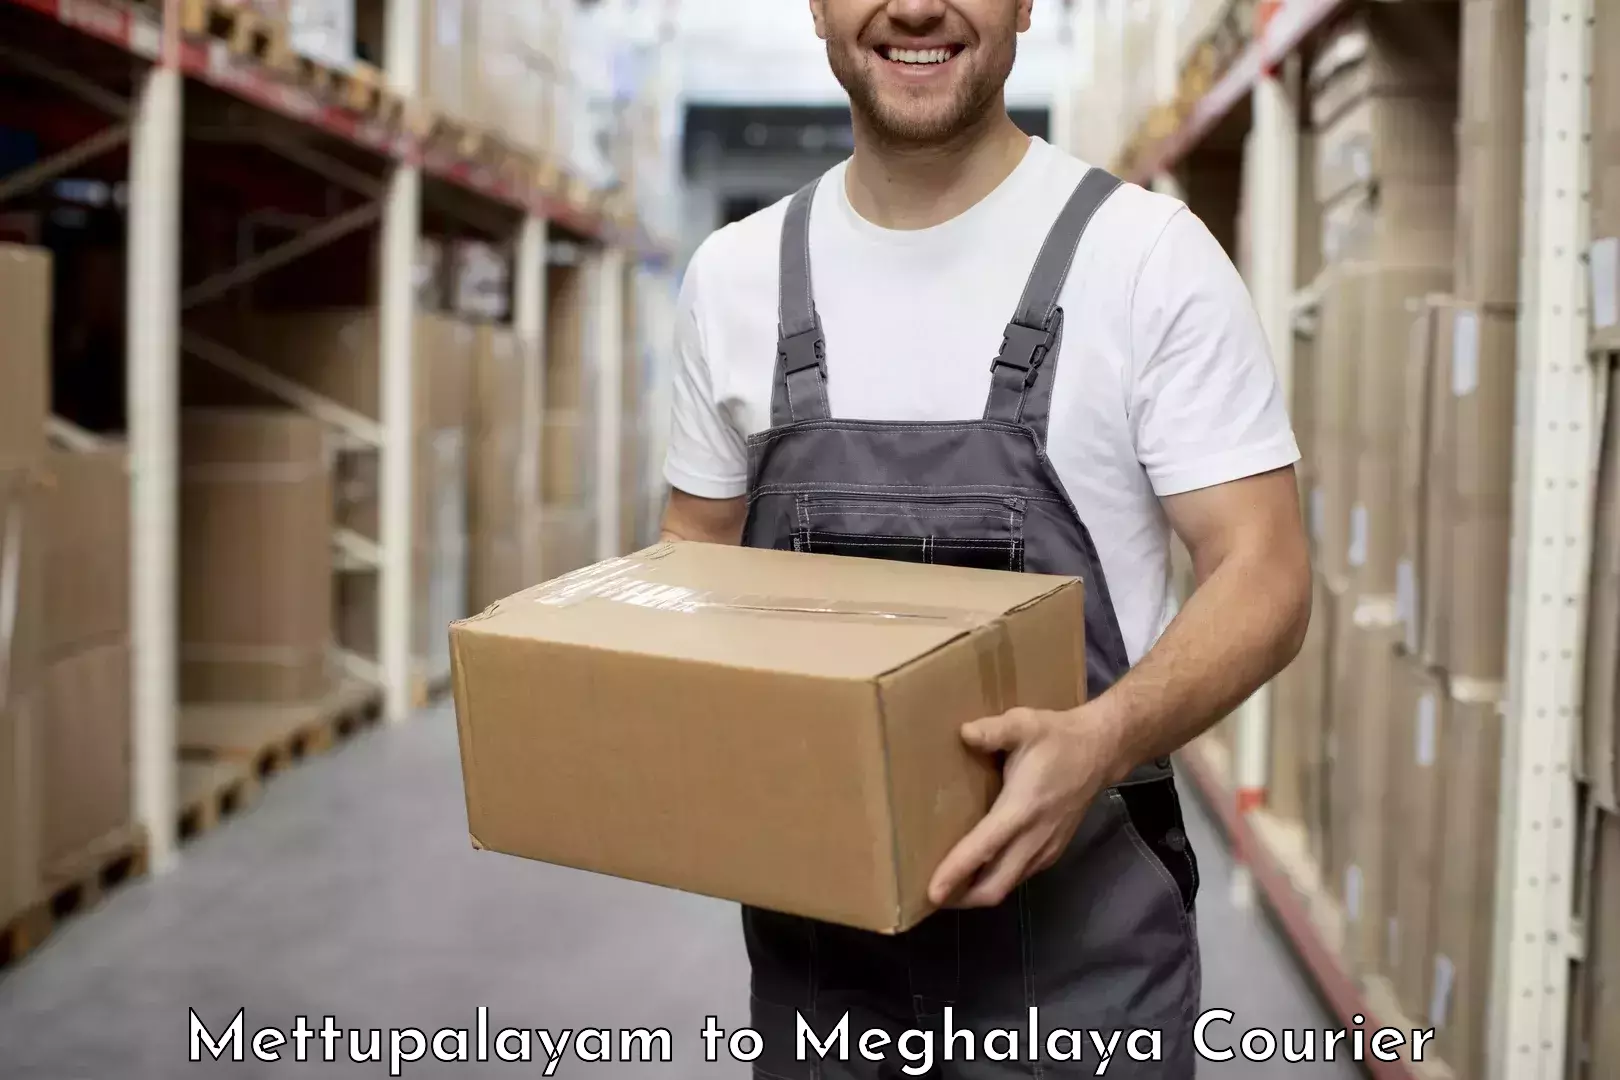 Reliable delivery network Mettupalayam to Shillong